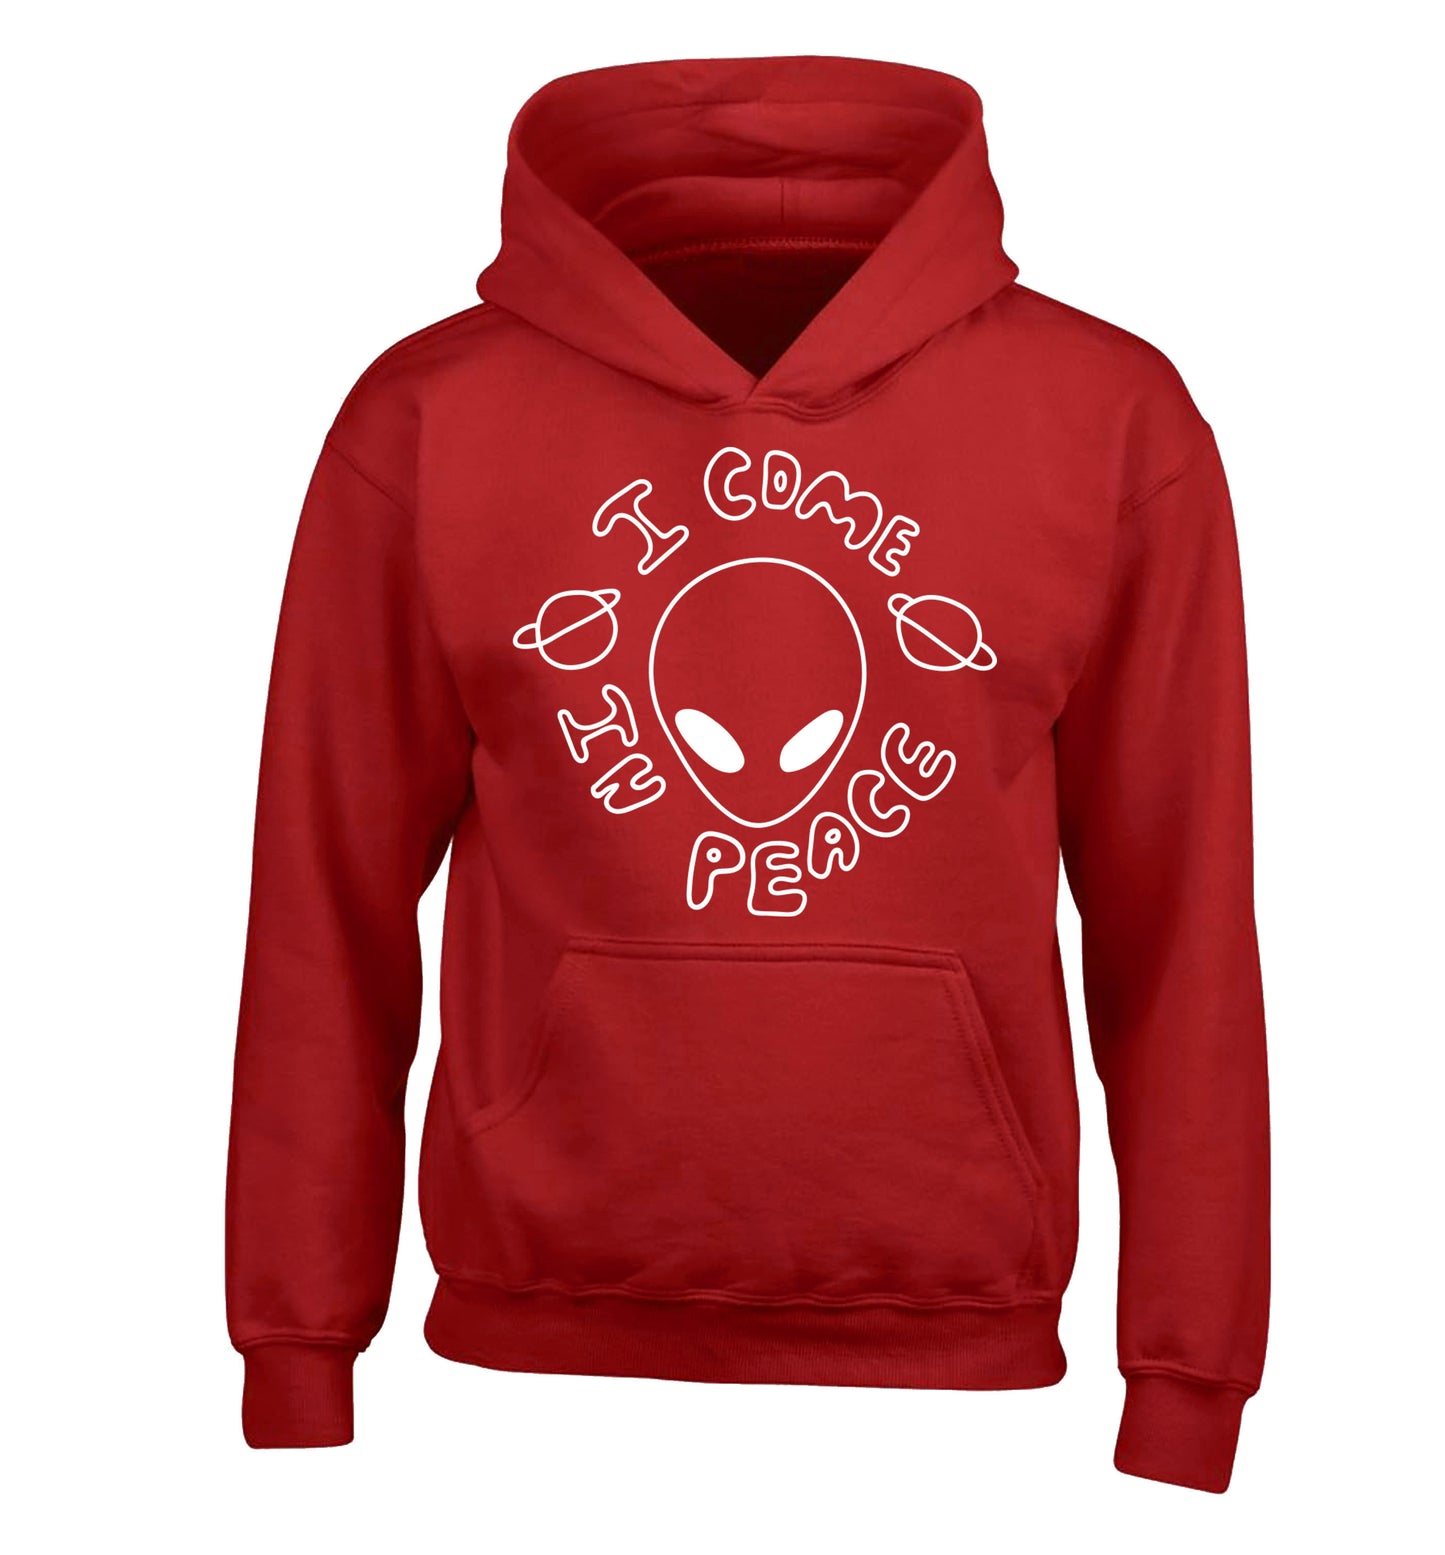 I come in peace children's red hoodie 12-14 Years